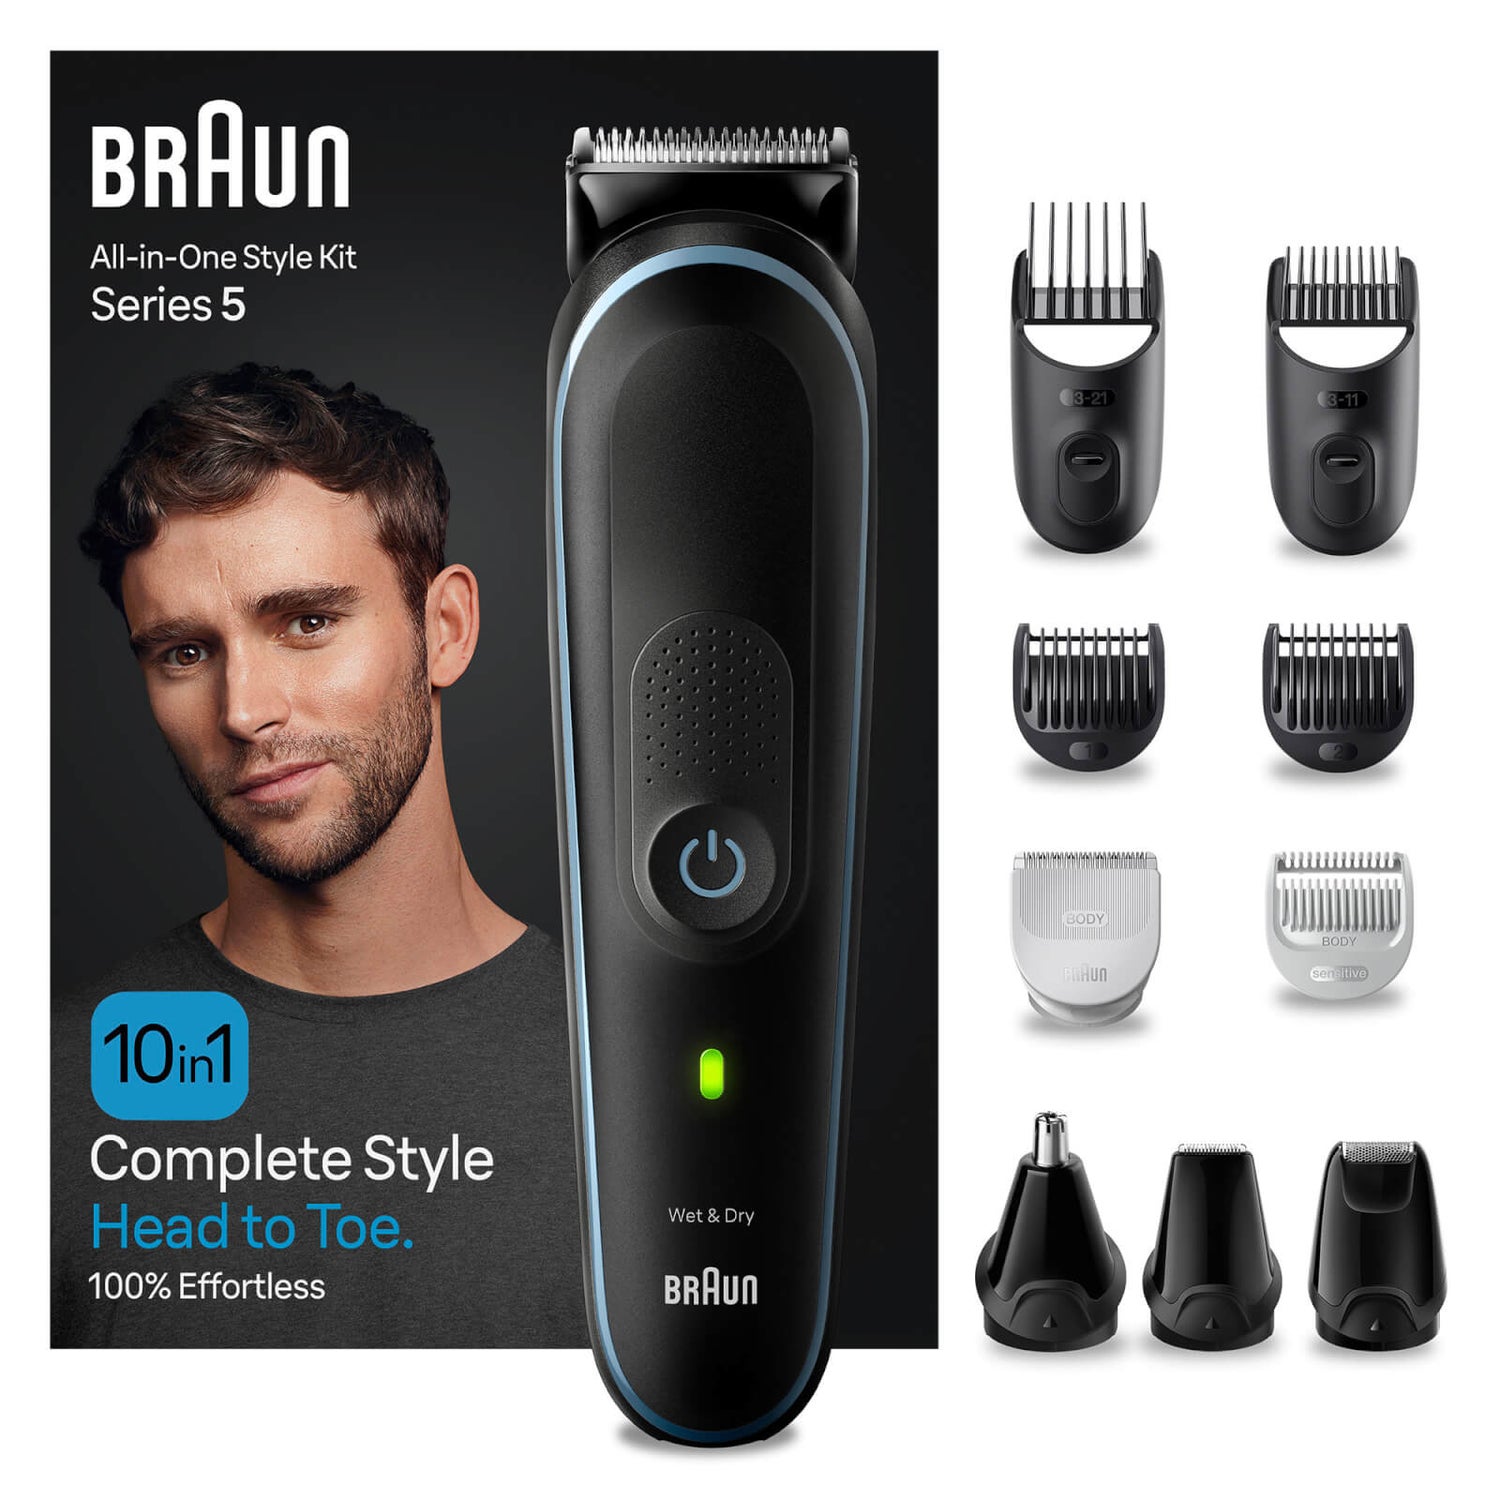 Braun All-In-One Style Kit Series 5 MGK5445